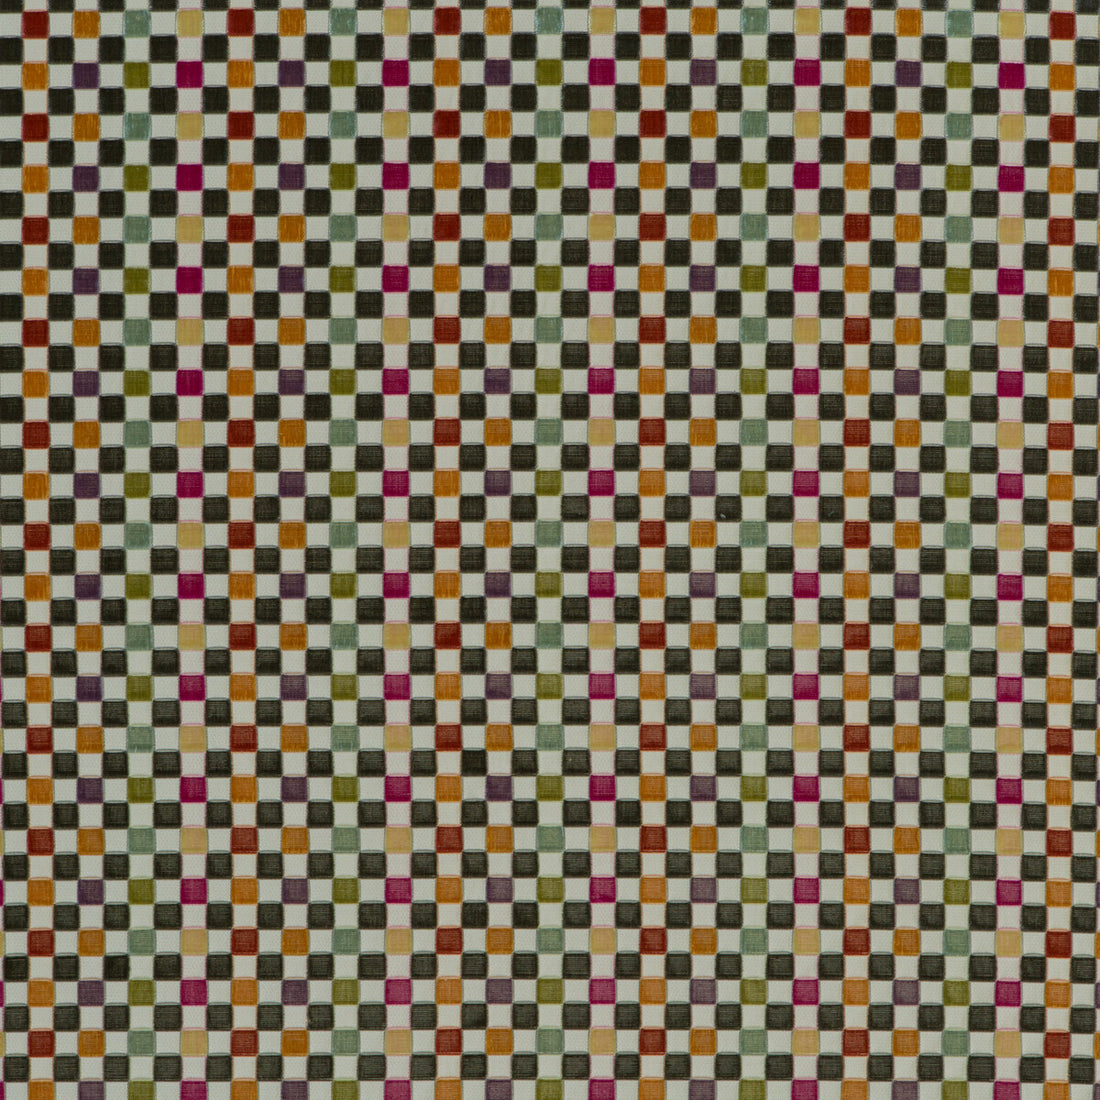 Clarendon Small Check fabric in multi color - pattern BF10551.1.0 - by G P &amp; J Baker in the Langdale collection